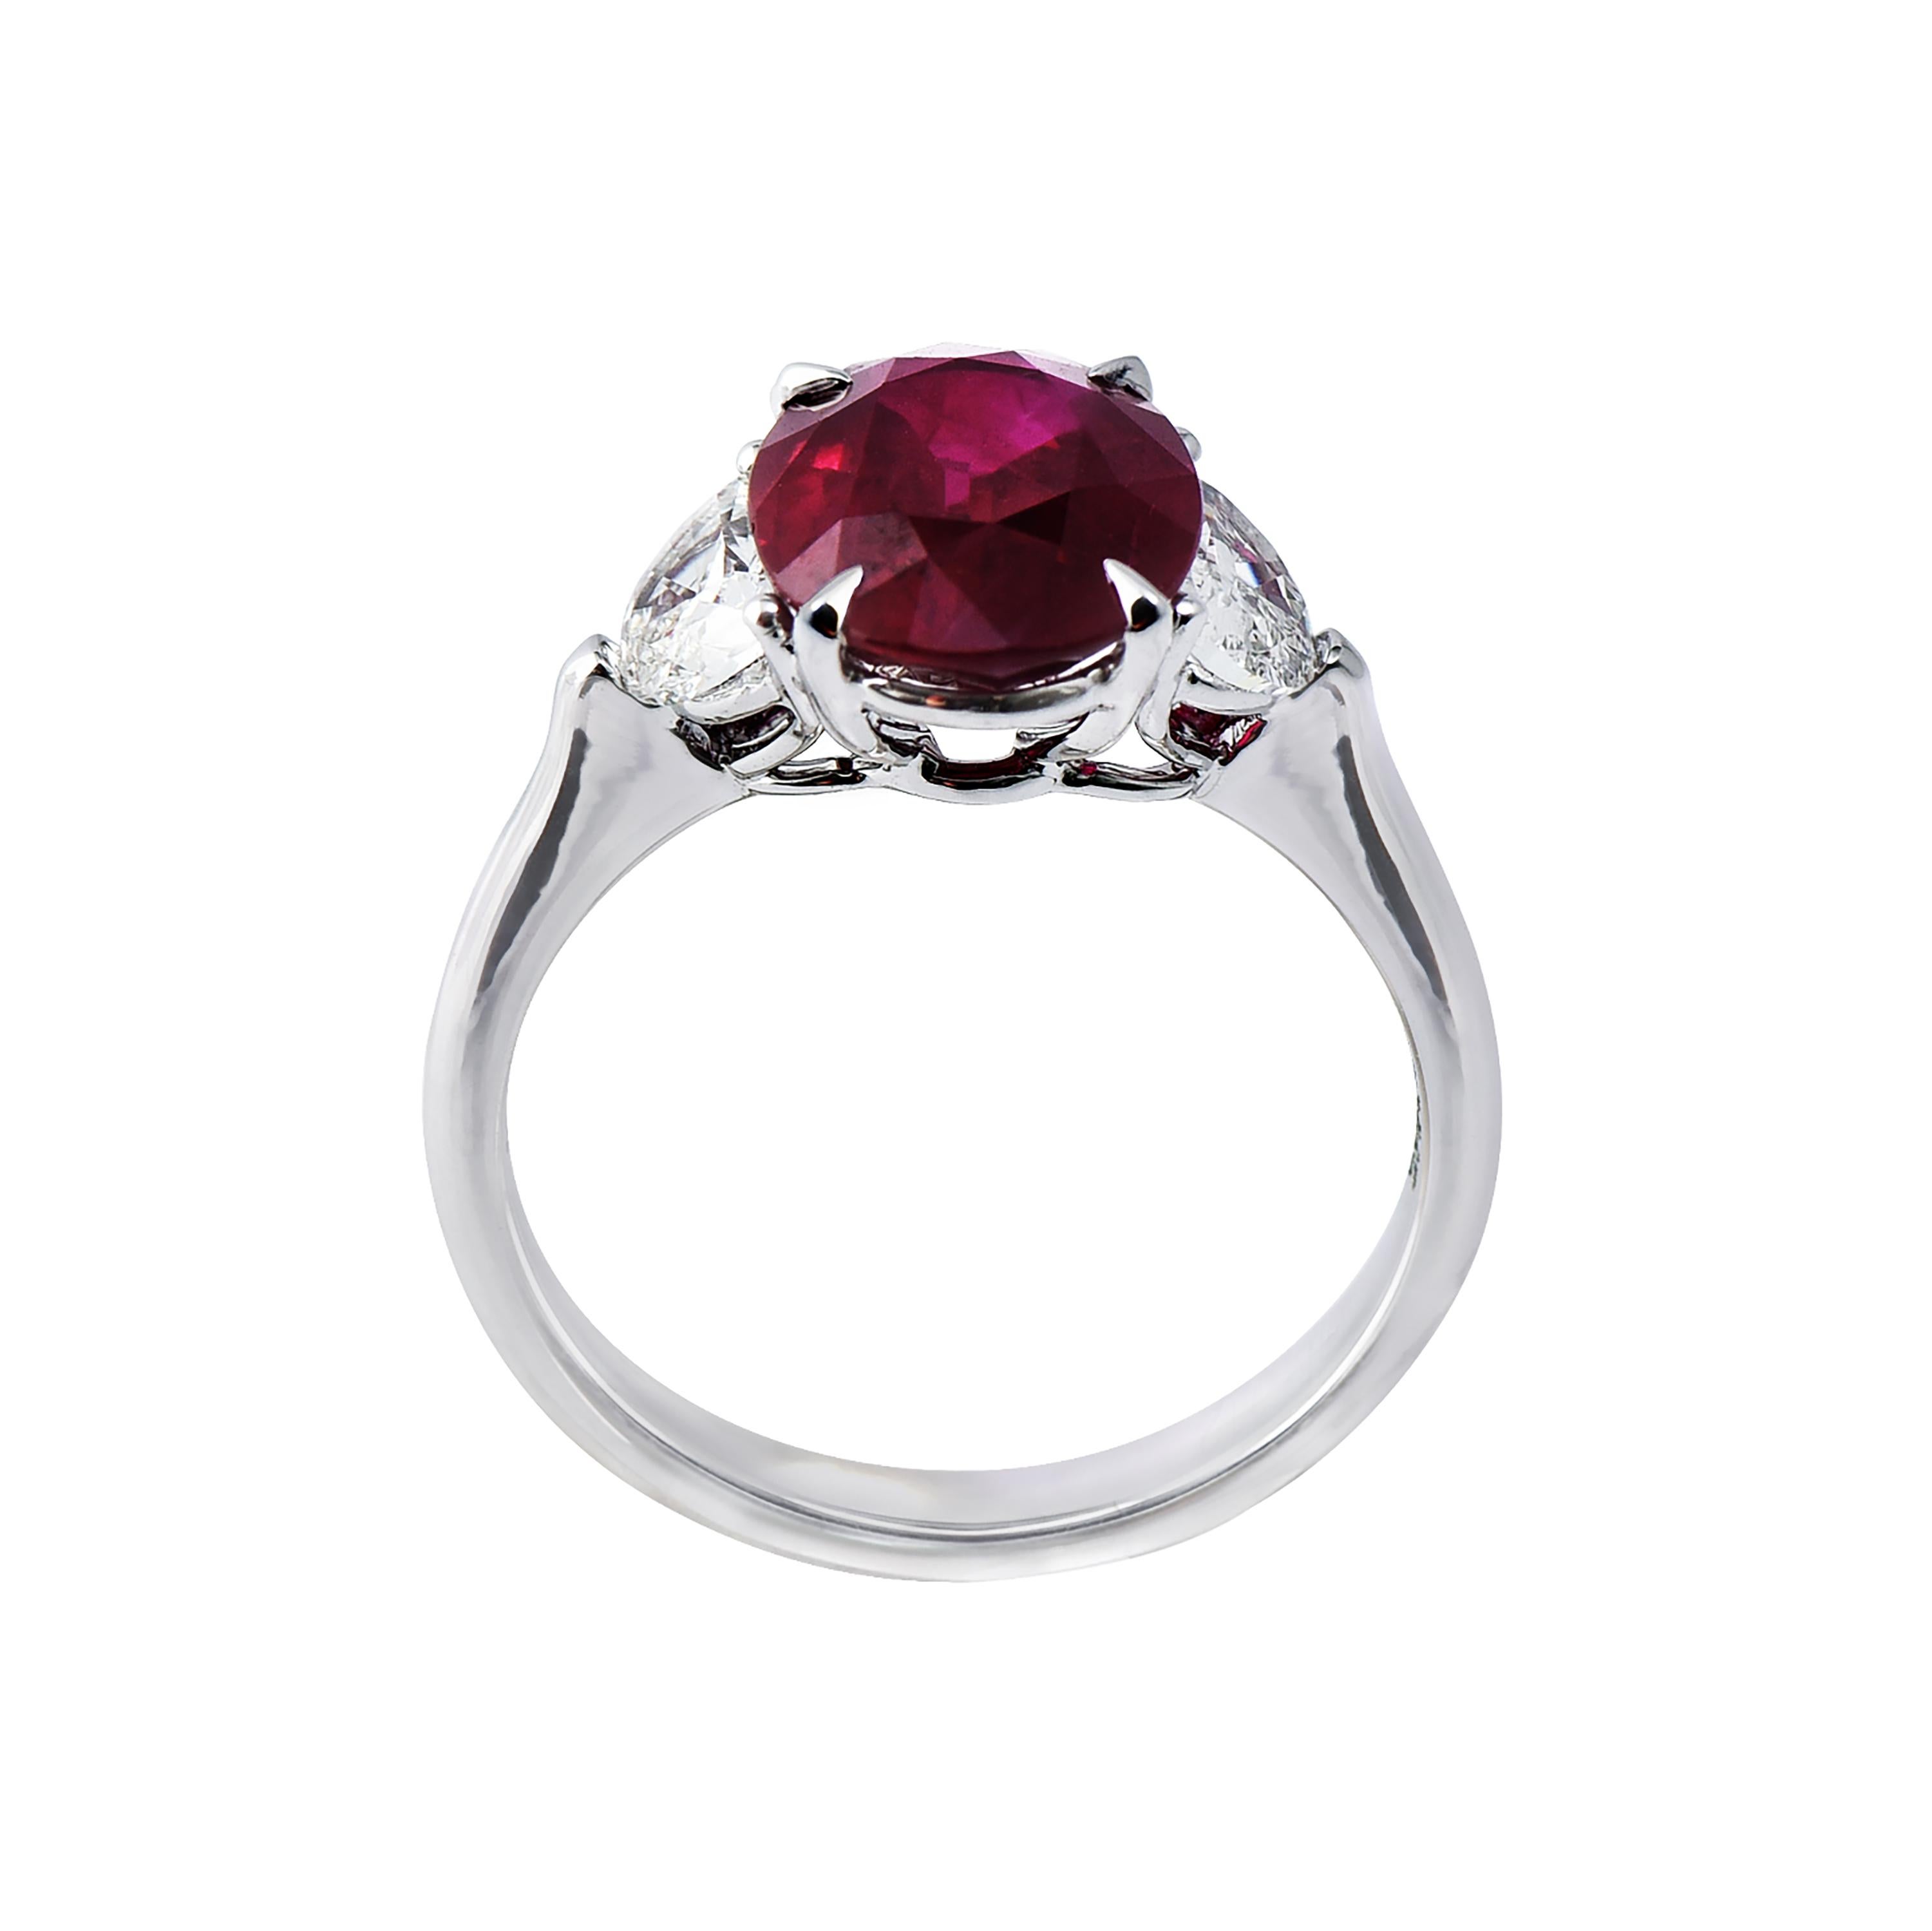 18 karat white gold ruby ring from the Scarlet collection of Laviere. The ring is set with a GRS certified 3.29 carats oval shape Burmese ruby and two half moon cut diamonds totaling 0.71 carats. 
Gold Weight 4.25 grams. Diamond Clarity VS-SI.